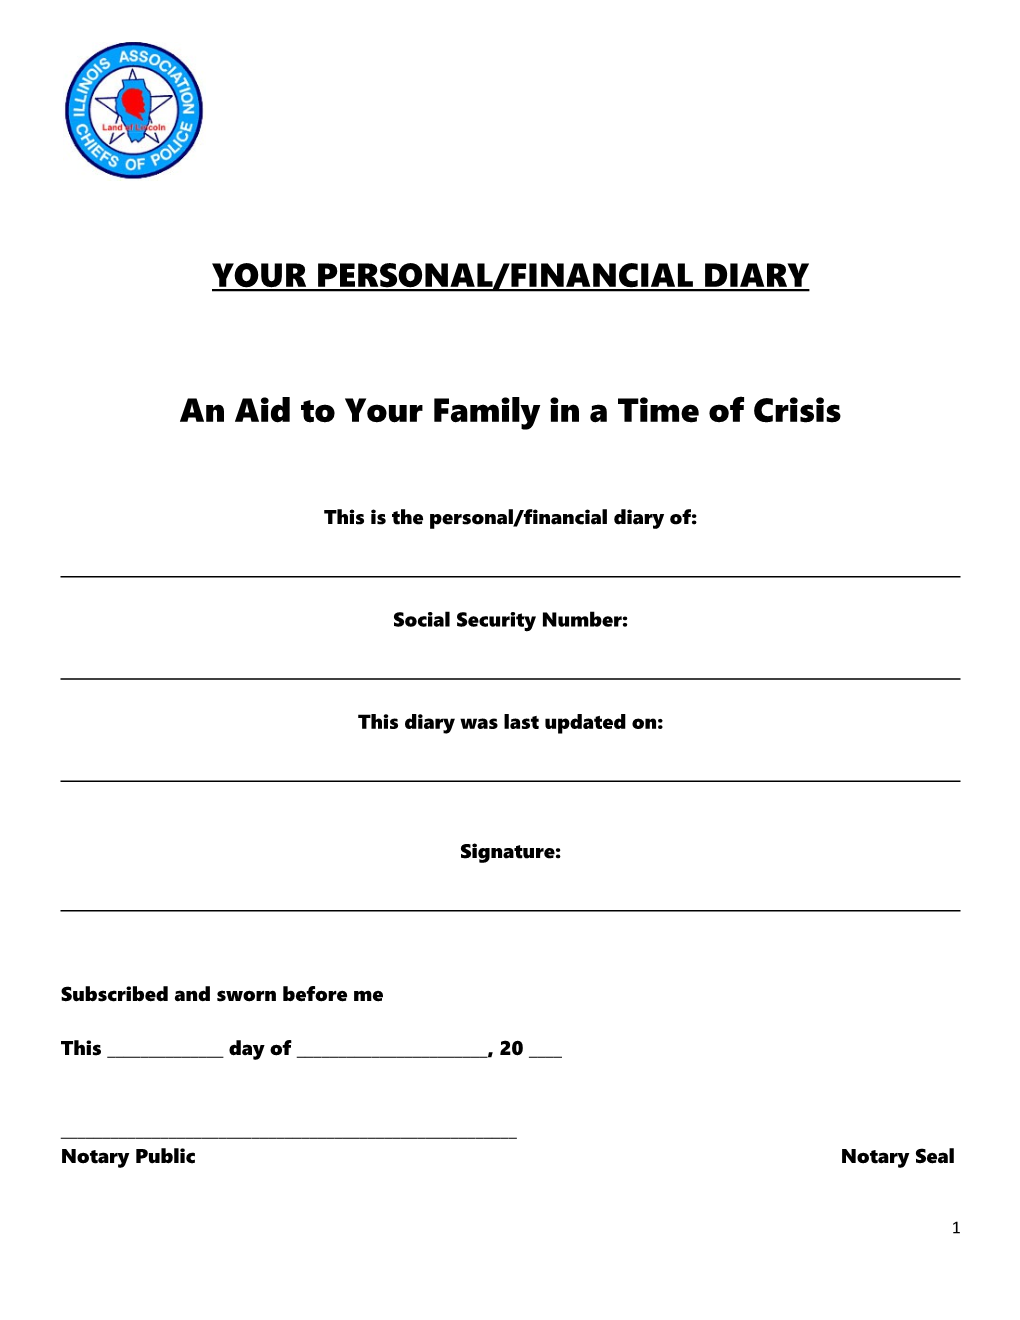 Your Personal/Financial Diary